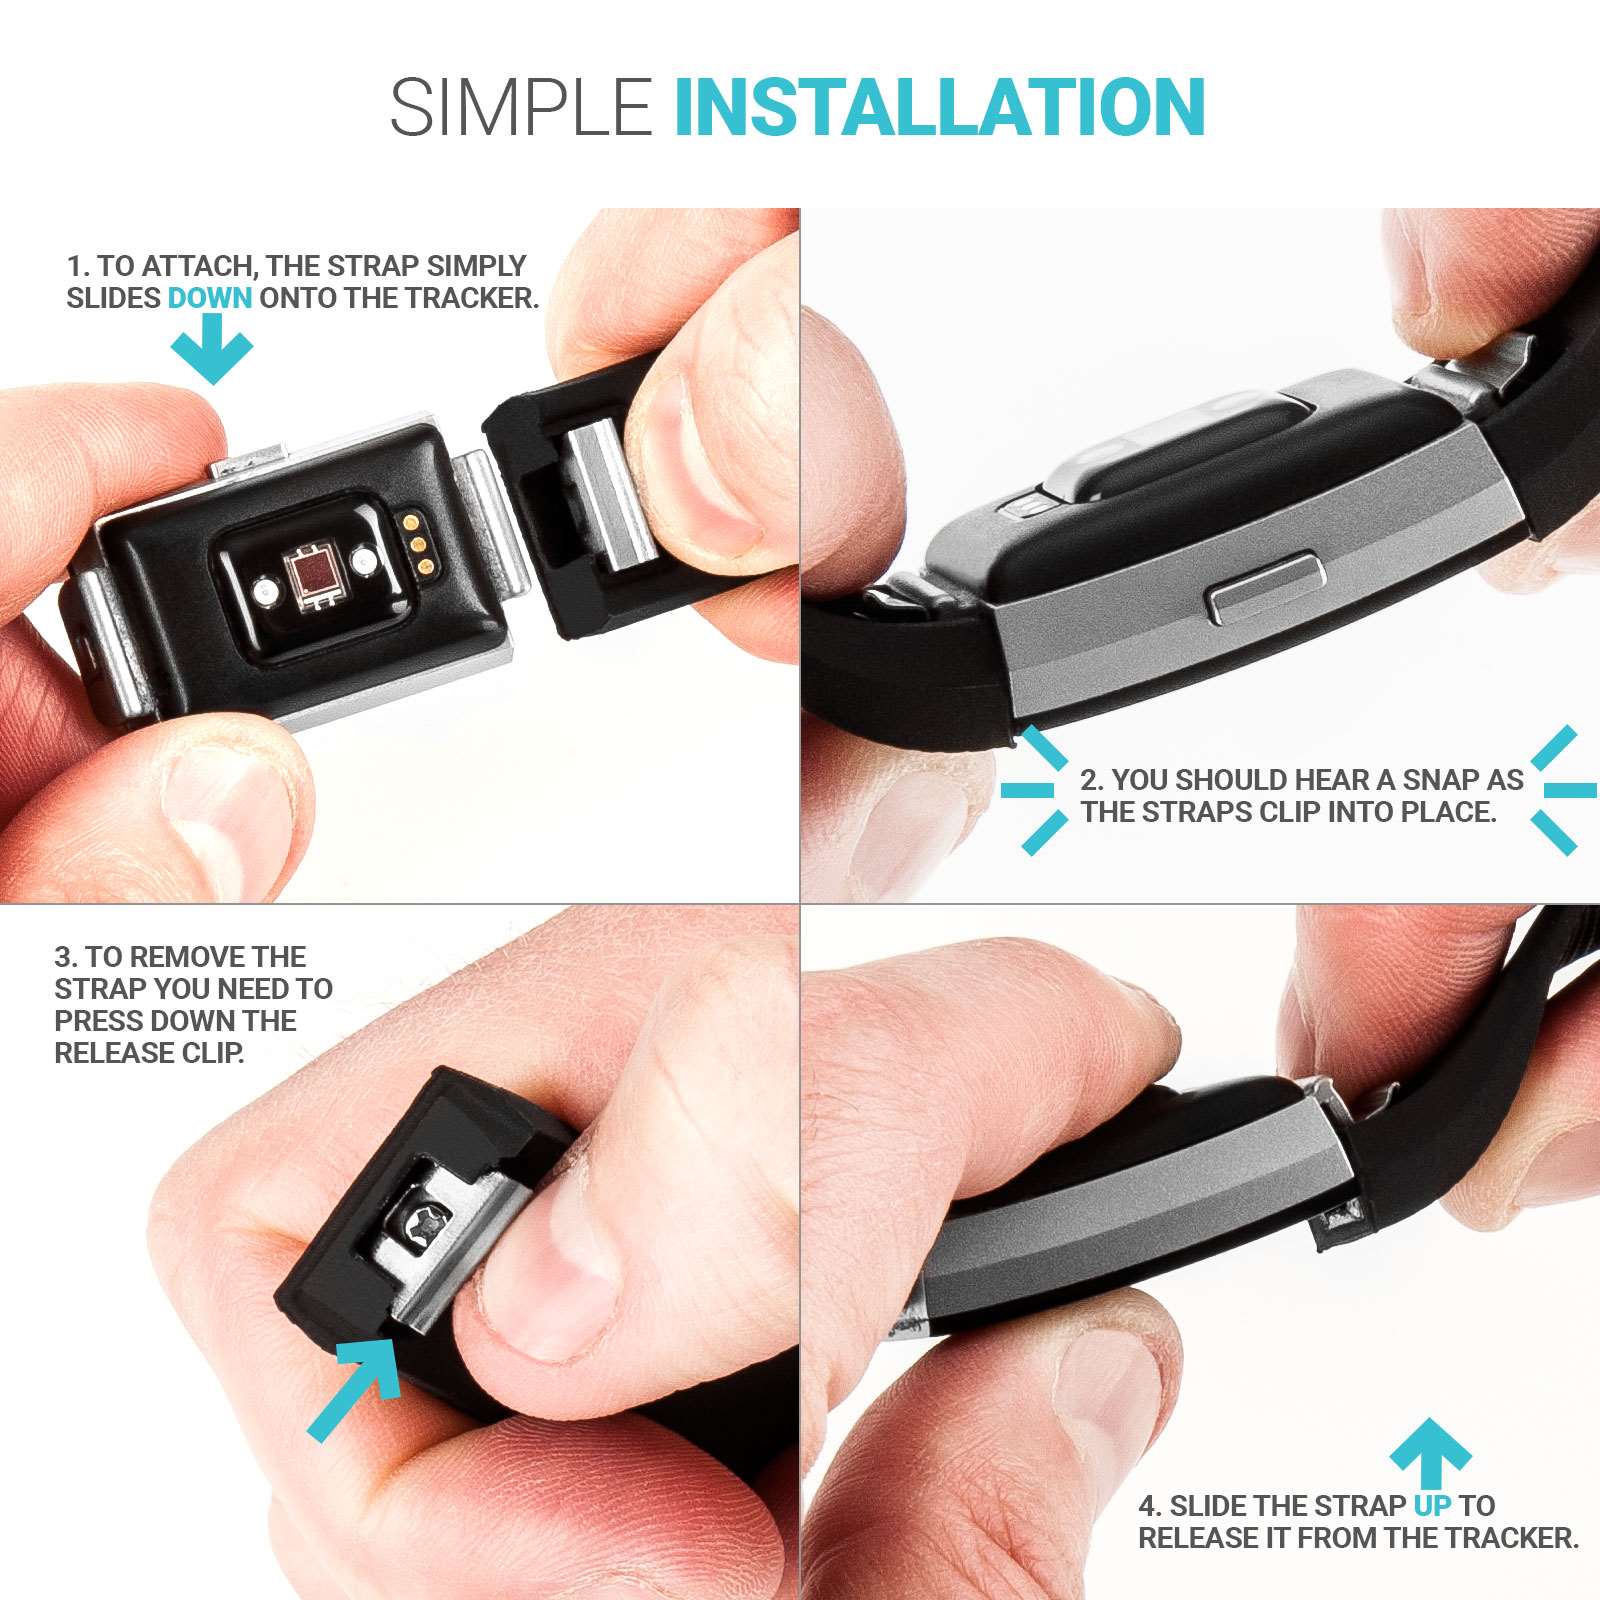 fit charge 2 straps